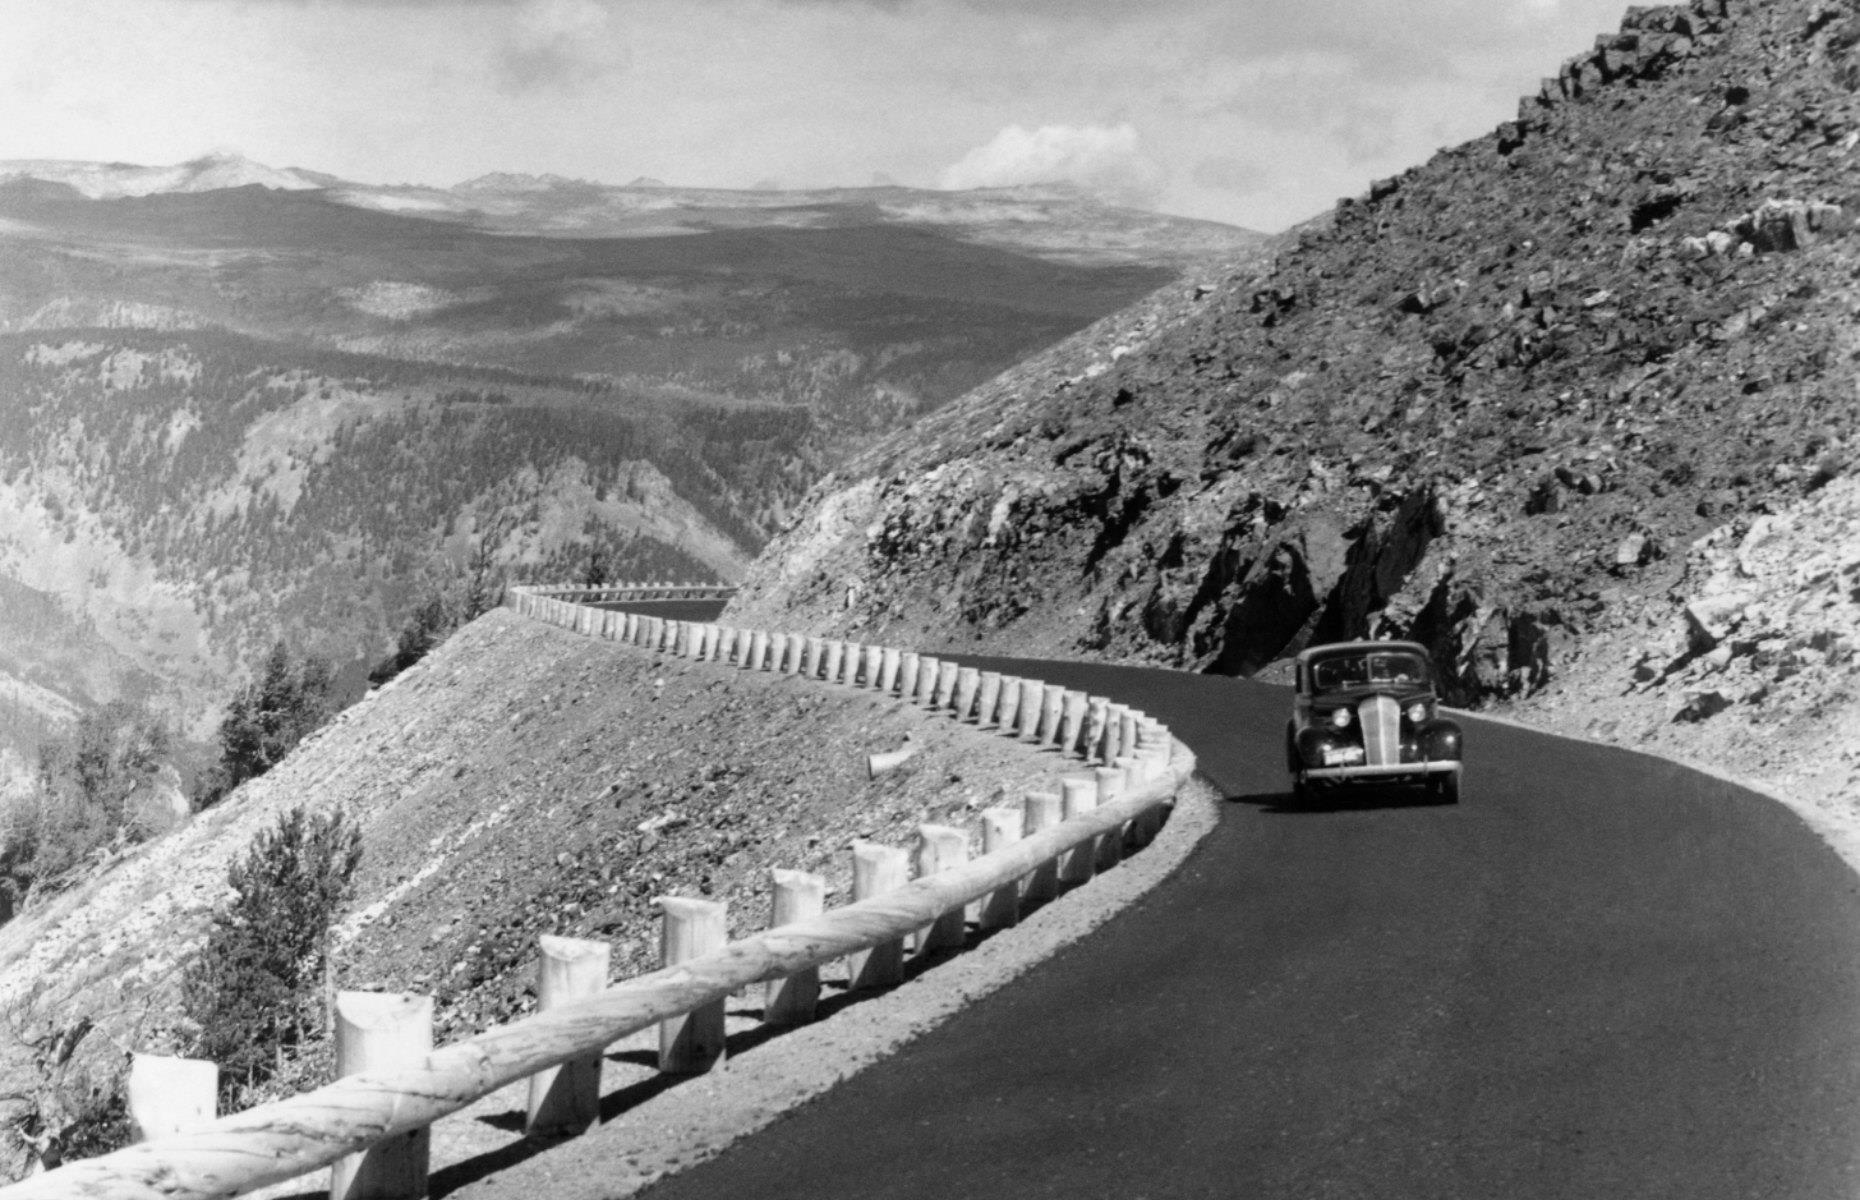 The national parks remained popular road trip destinations throughout the decade, as you can see from this black-and-white image of a car driving through Yellowstone in 1941. Parks’ infrastructure began to improve and families’ disposable income rose dramatically, making vacations more accessible for many too.